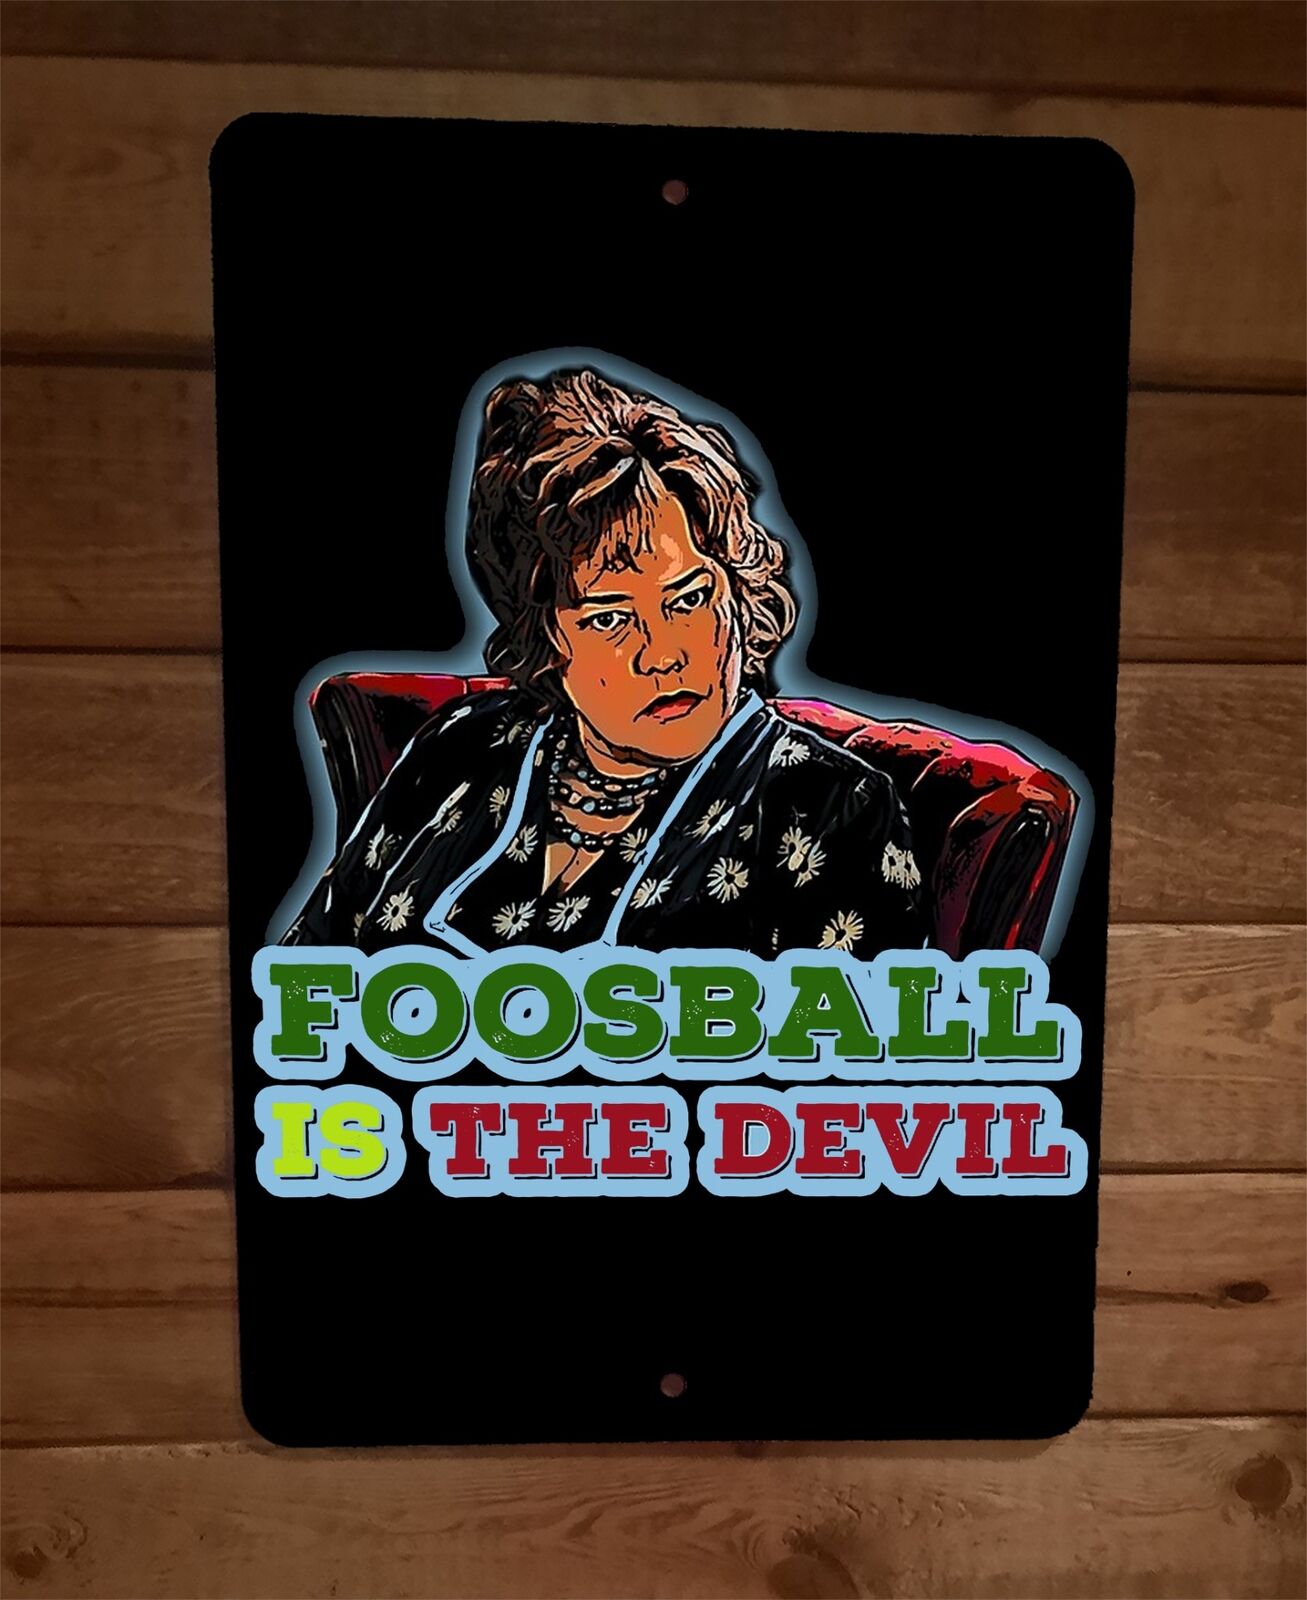 Foosball is the Devil Waterboy Momma Said 8x12 Metal Wall Sign Poster